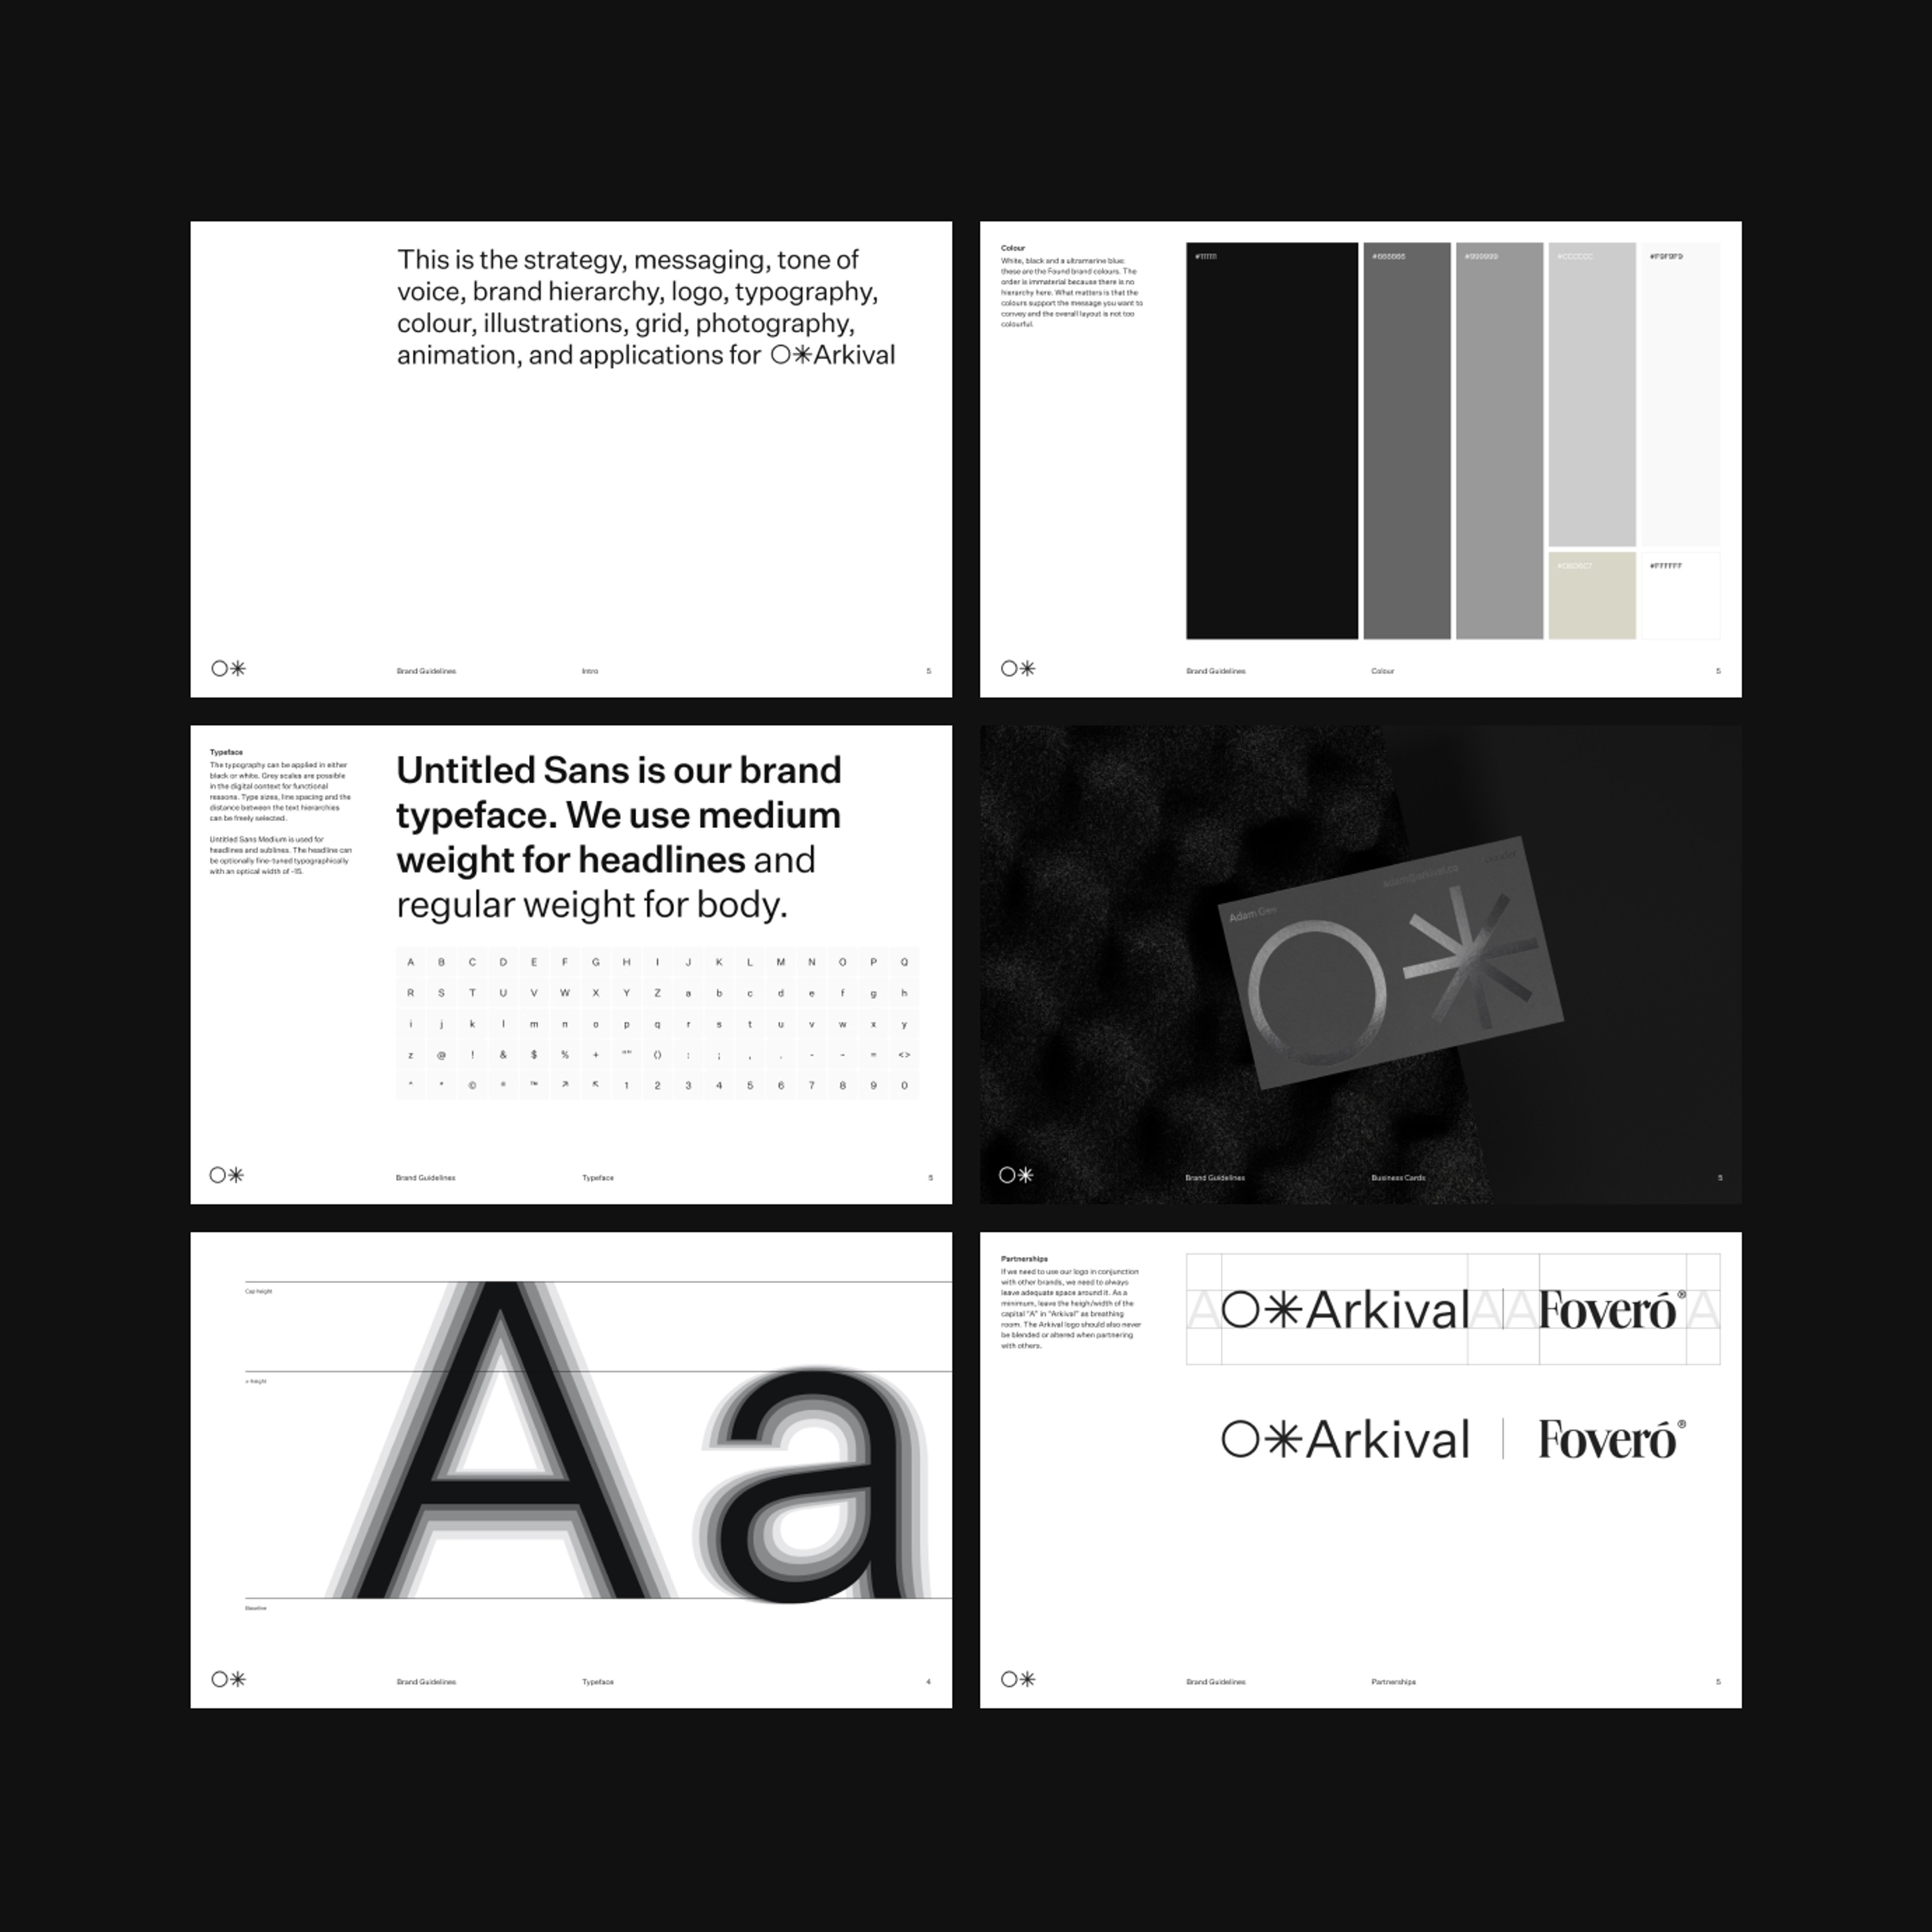 Image of various slides from the Atrium brand guidelines